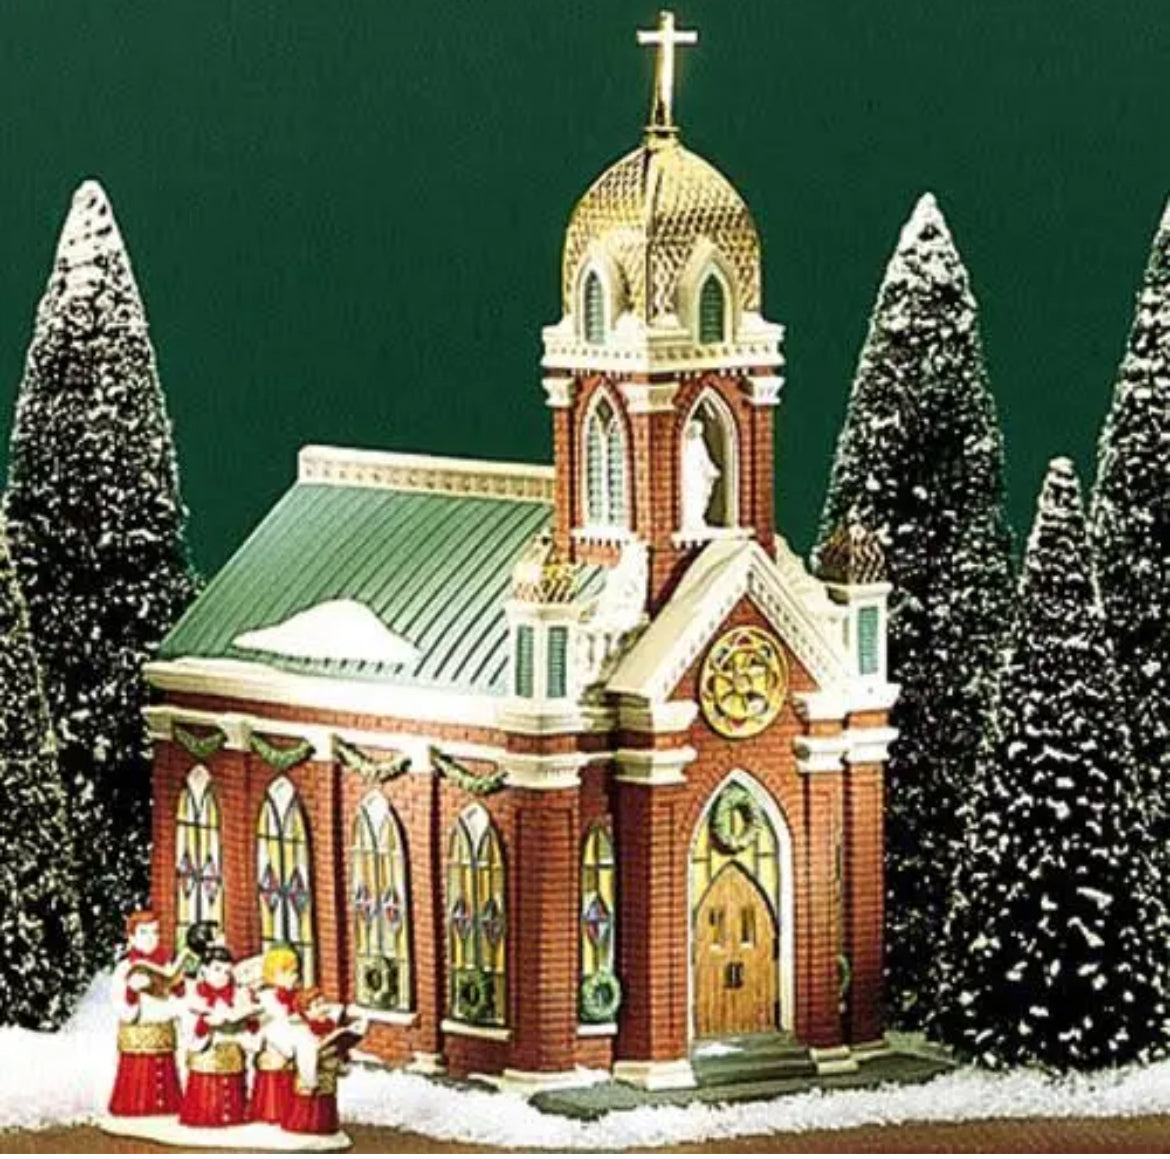 Department 56 - Heritage Village - Holy Name Church